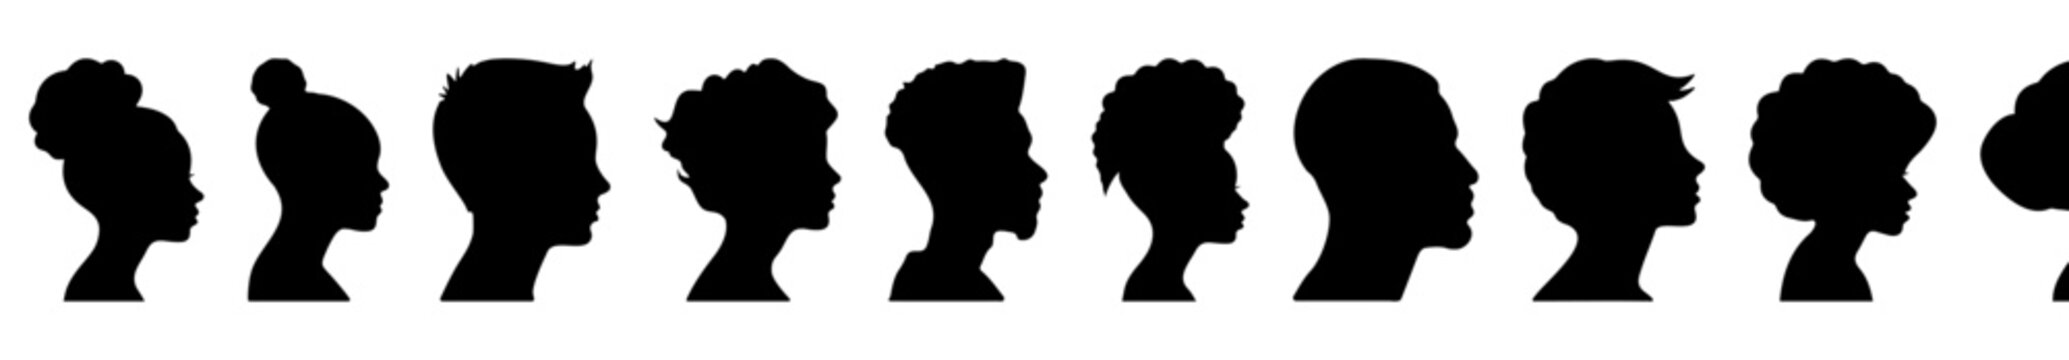 Profile silhouette faces of different people. Vector illustration isolated on white background